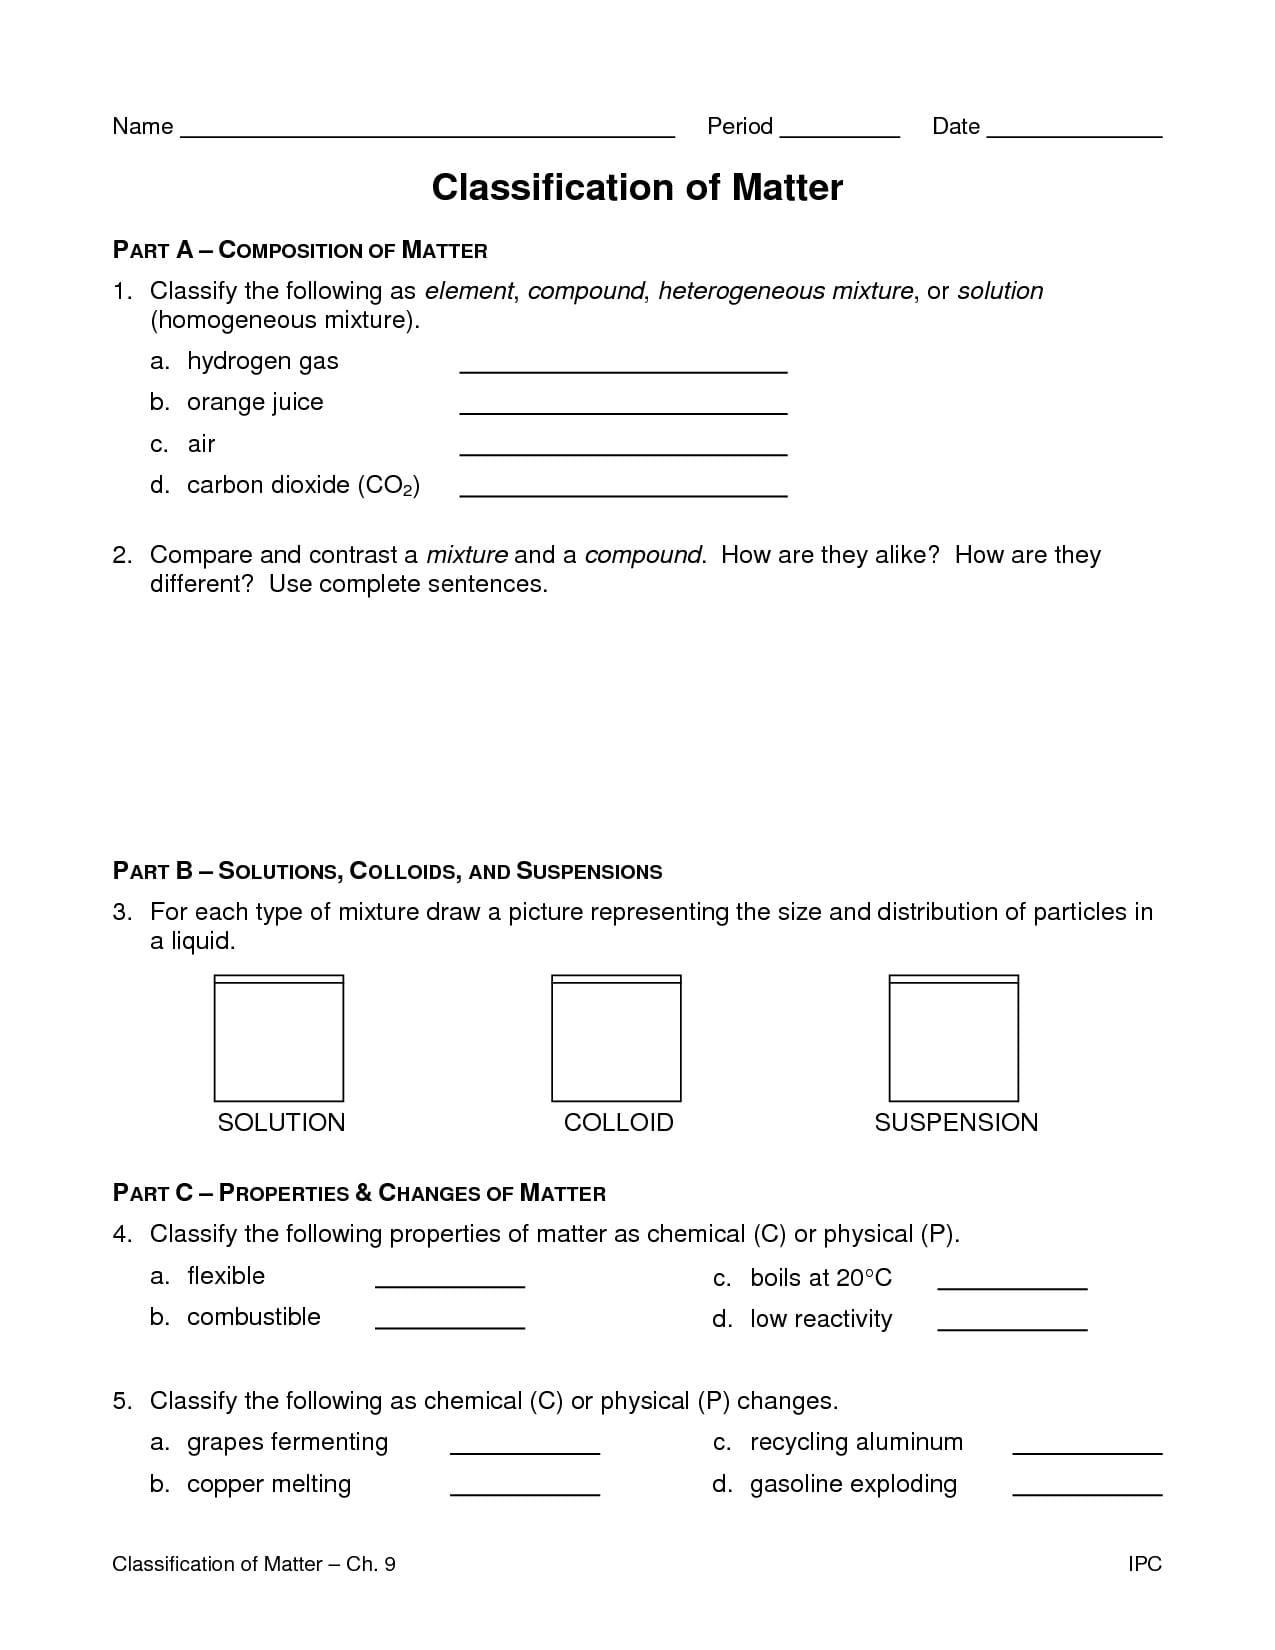 chemistry-1-worksheet-classification-of-matter-and-changes-db-excel